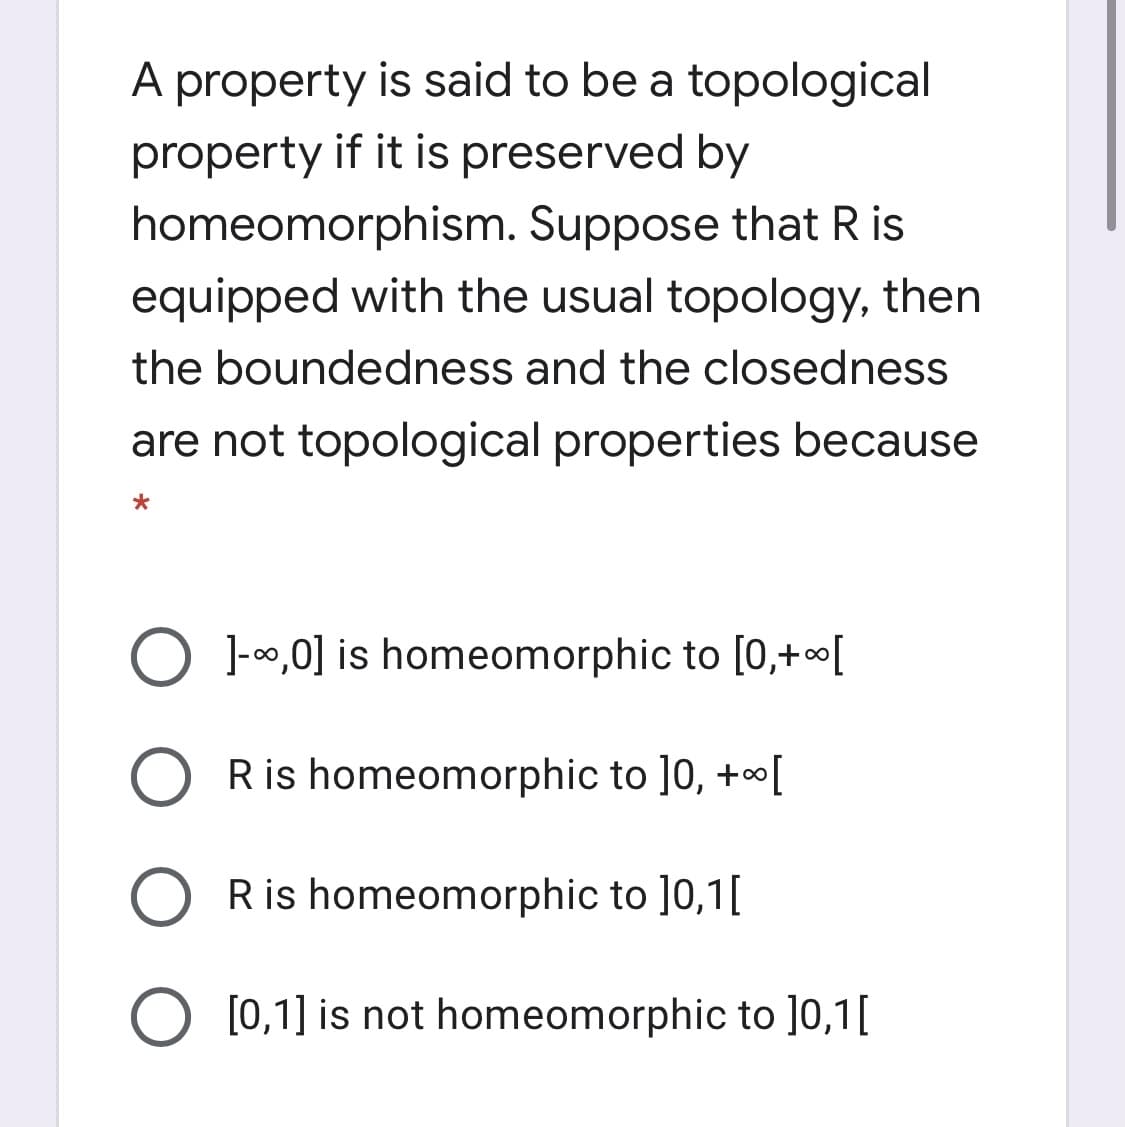 A property is said to be a topological
property if it is preserved by
homeomorphism. Suppose that R is
equipped with the usual topology, then
the boundedness and the closedness
are not topological properties because
O 1-00,0] is homeomorphic to [0,+[
O Ris homeomorphic to ]0, +[
R is homeomorphic to ]0,1[
[0,1] is not homeomorphic to ]0,1[
